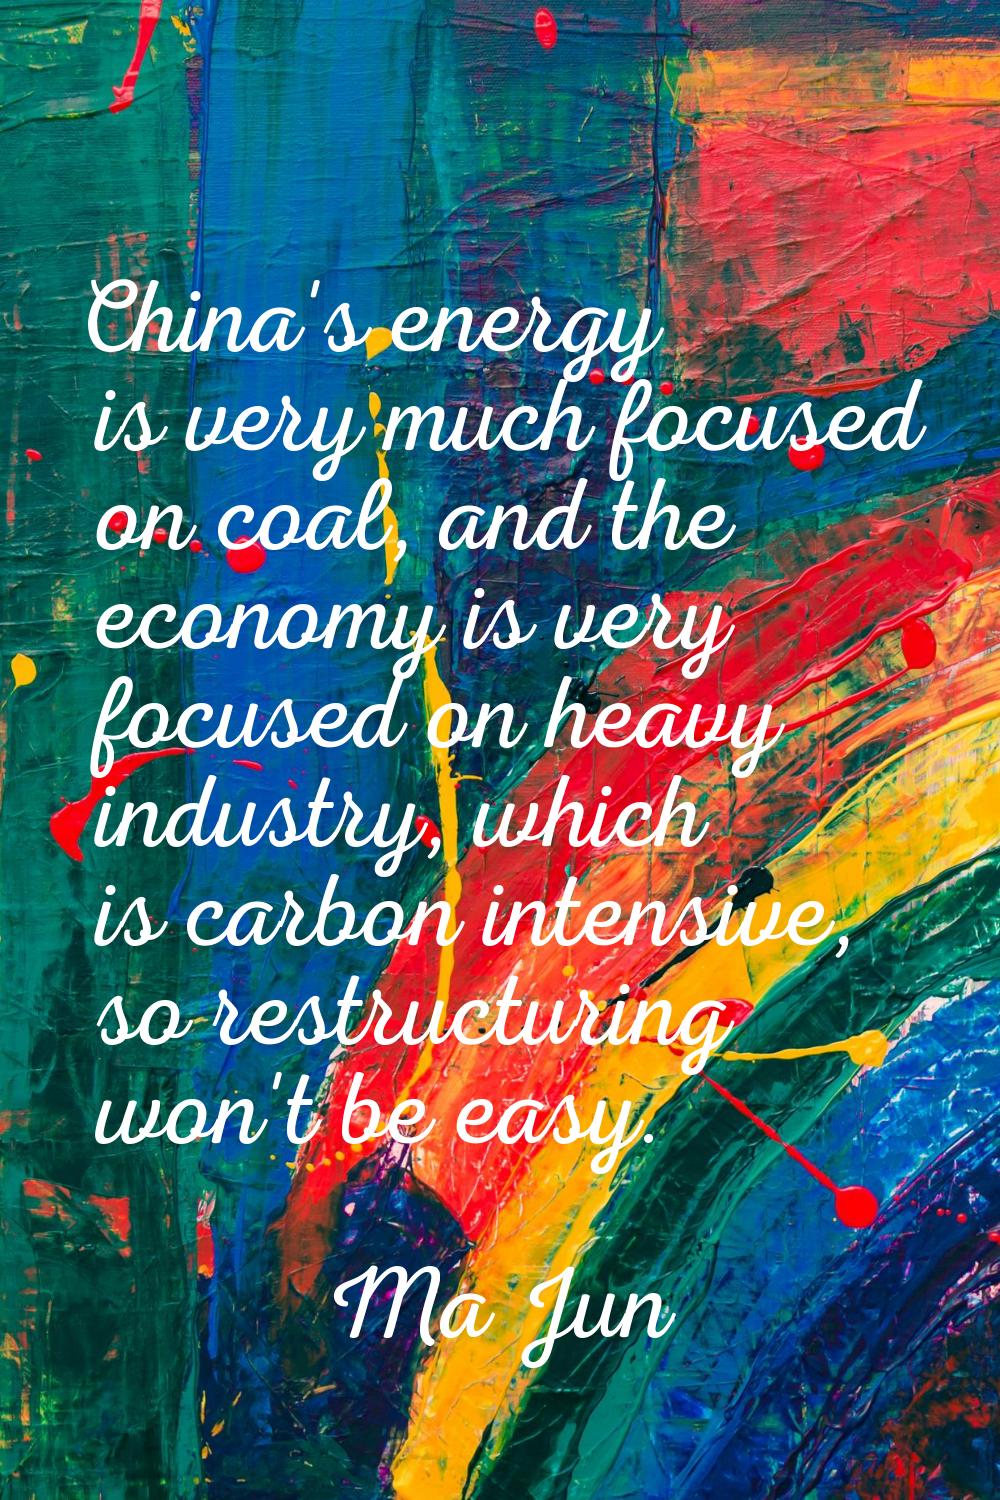 China's energy is very much focused on coal, and the economy is very focused on heavy industry, whi